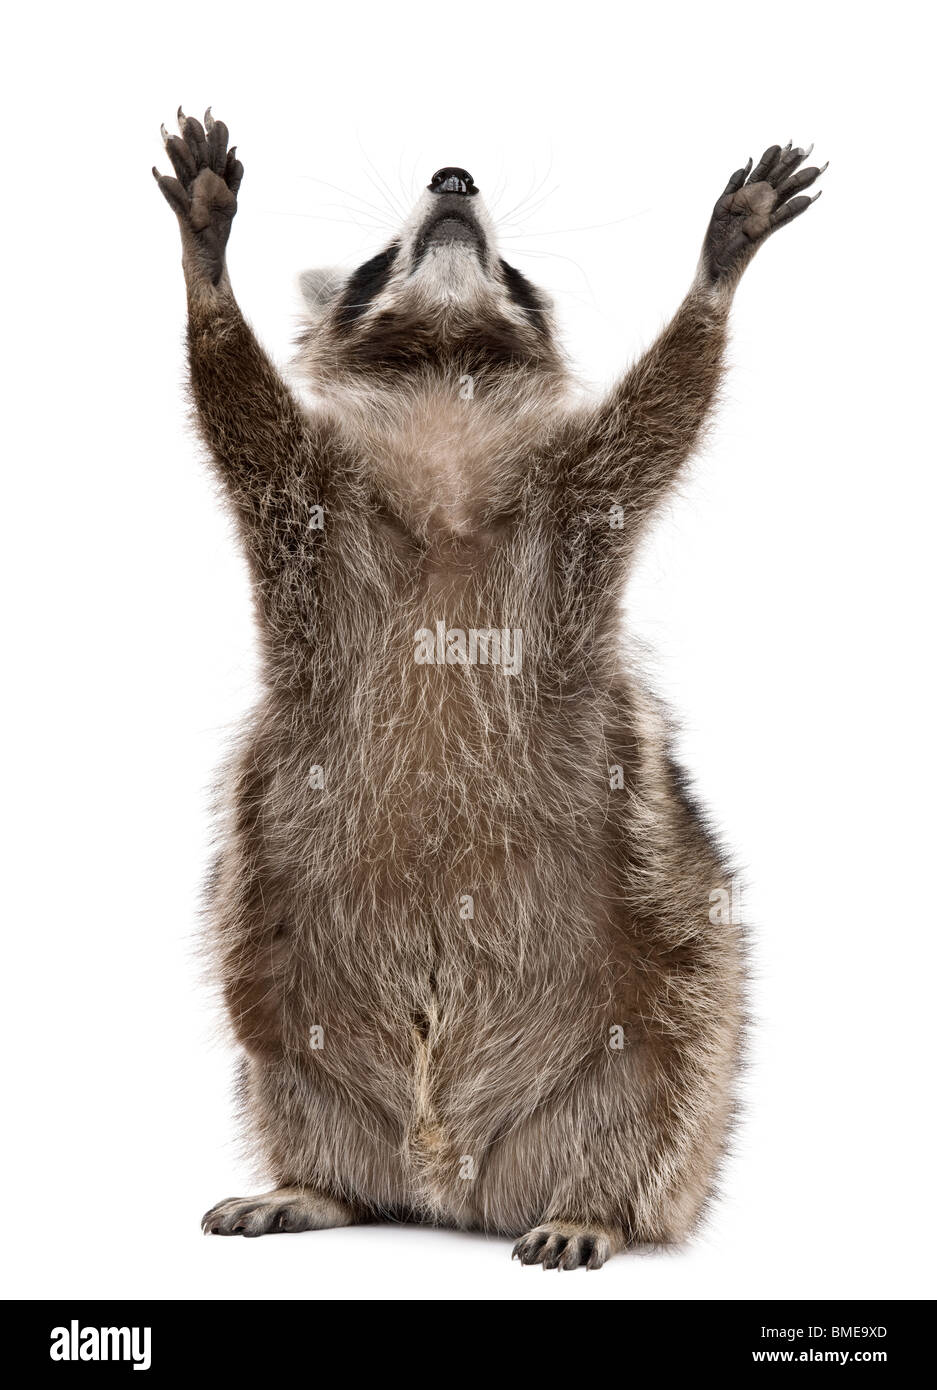 Raccoon, 2 years old, reaching up in front of white background Stock Photo